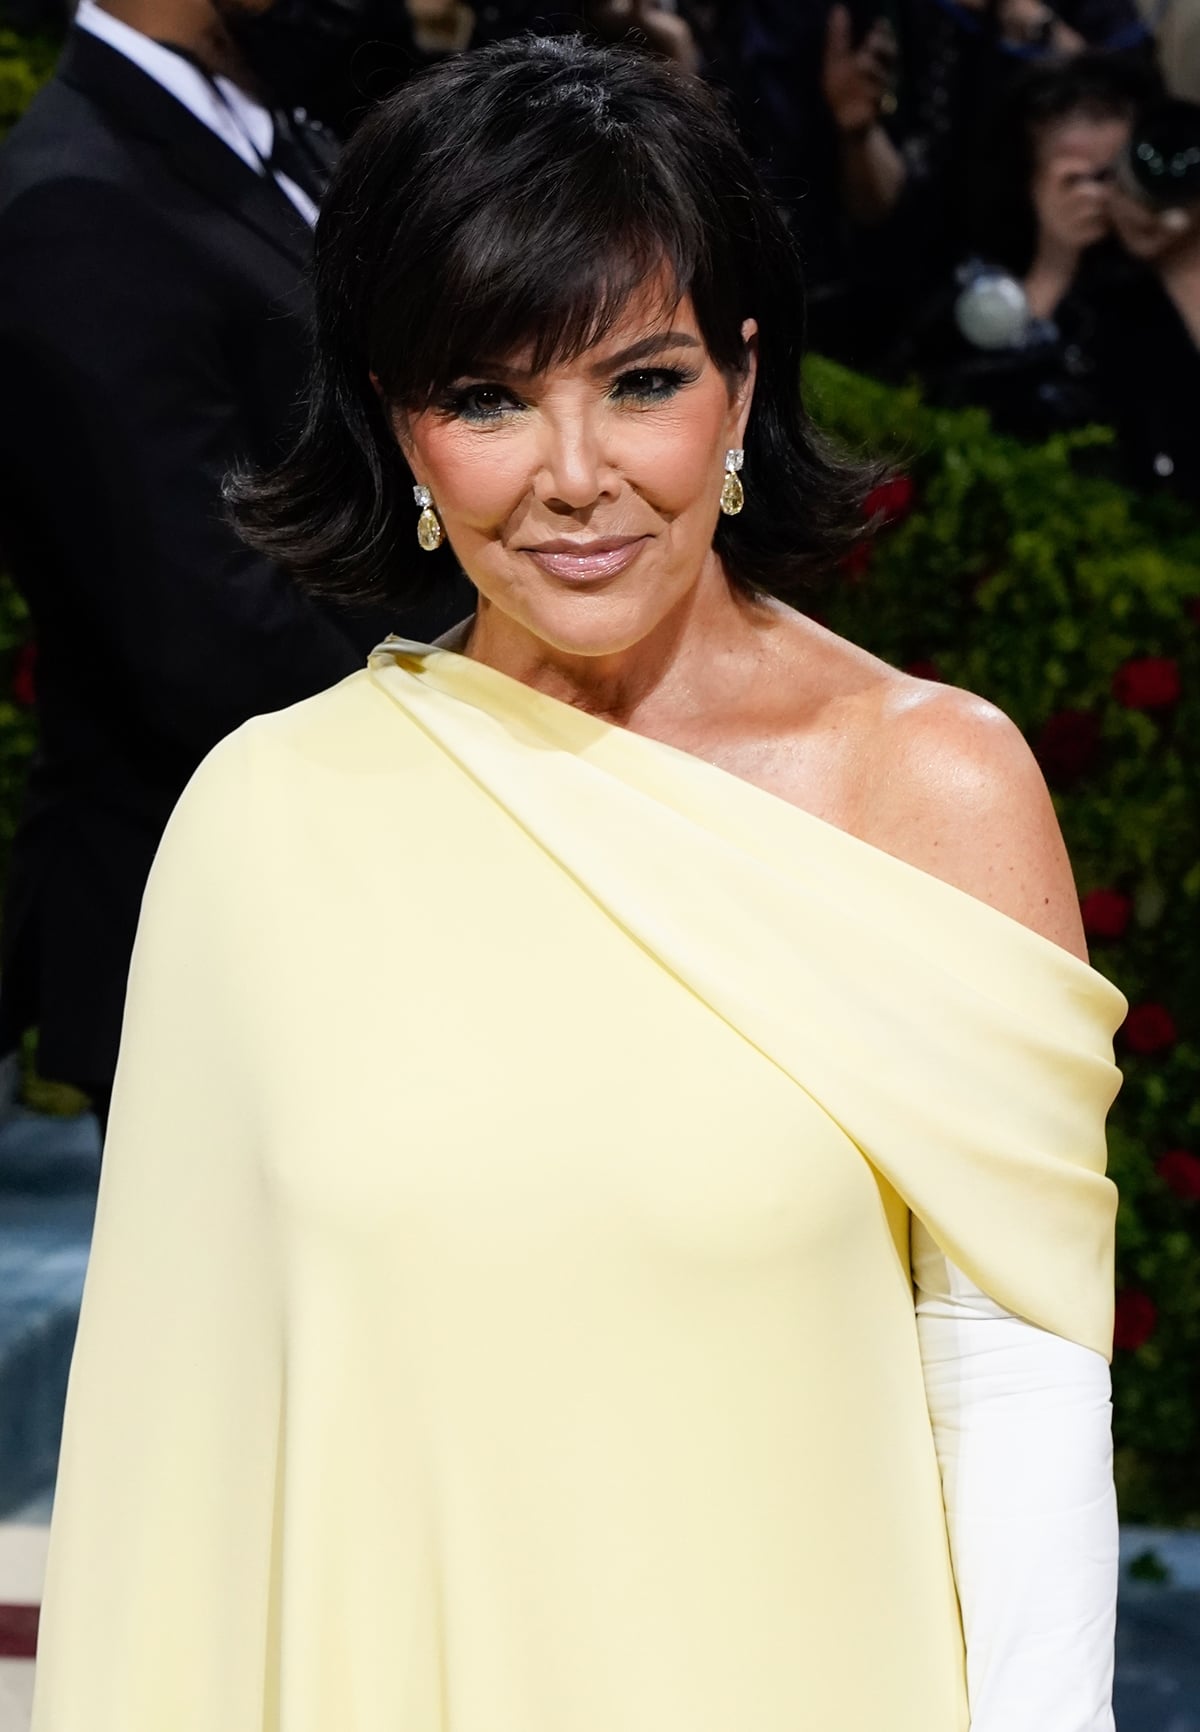 Kris Jenner channeled American socialite Jacqueline Lee Kennedy Onassis who served as the first lady of the United States from 1961 to 1963